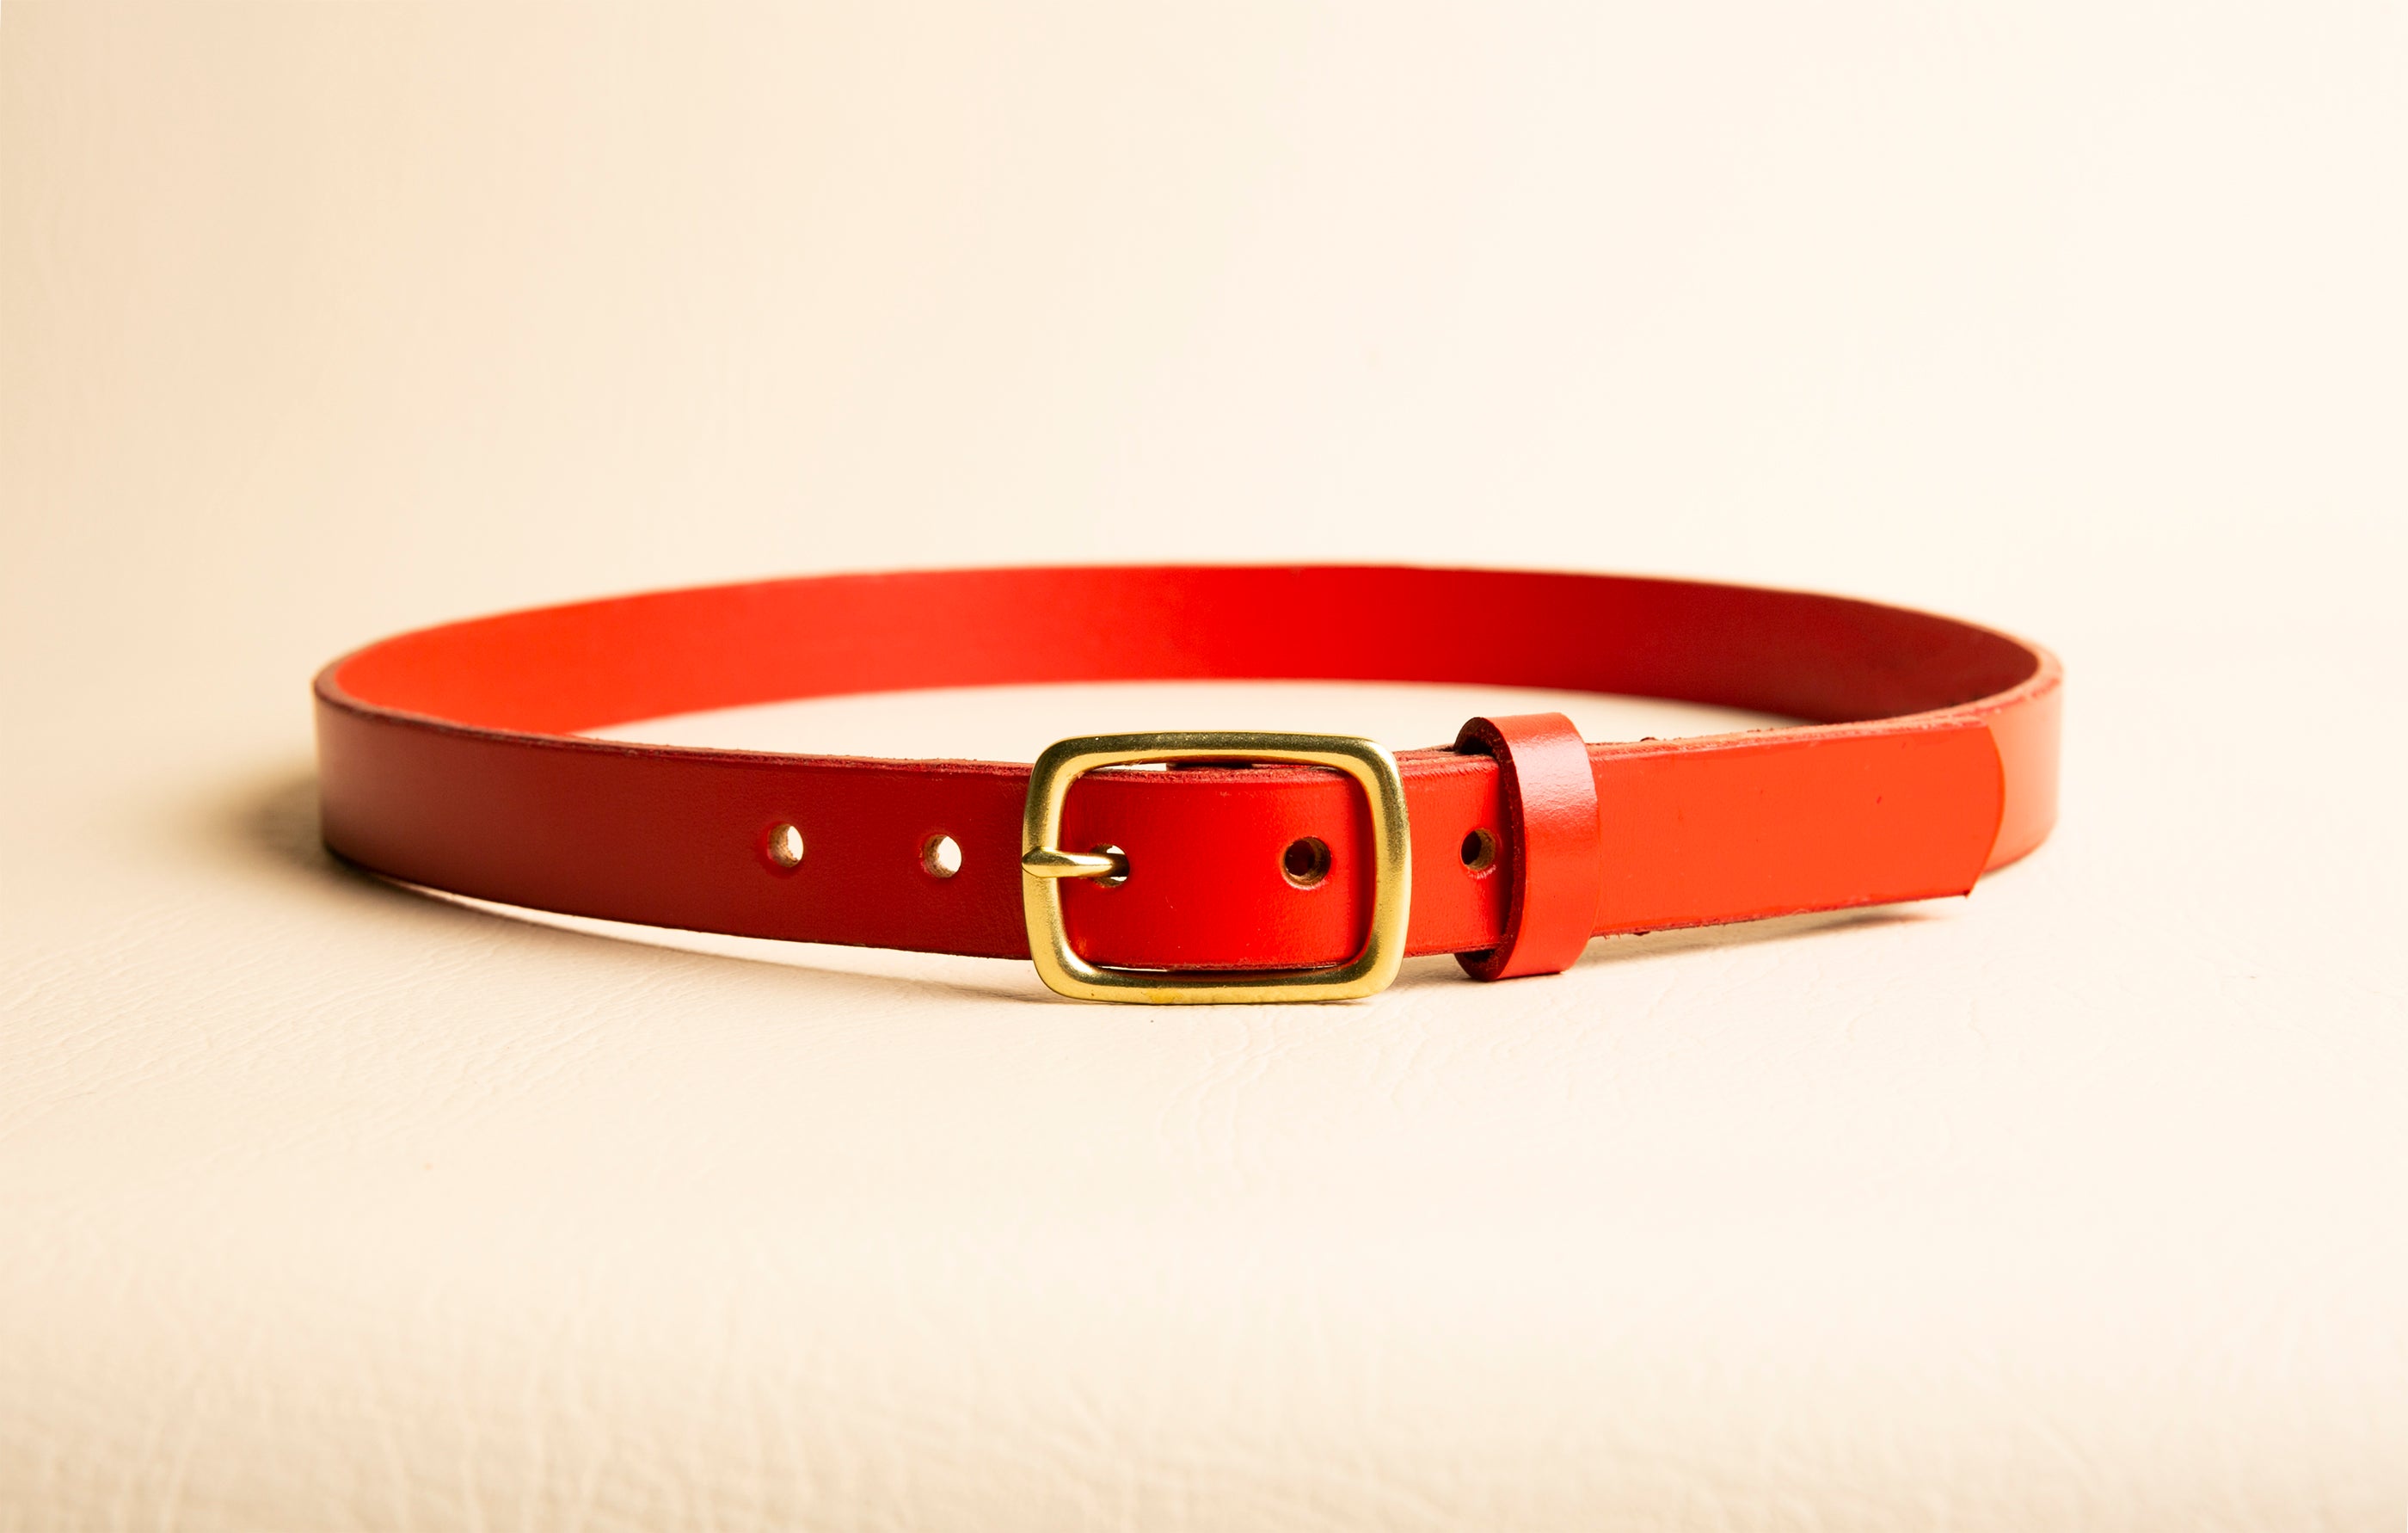 No.2 Slim Leather Belt in Ruby Red.